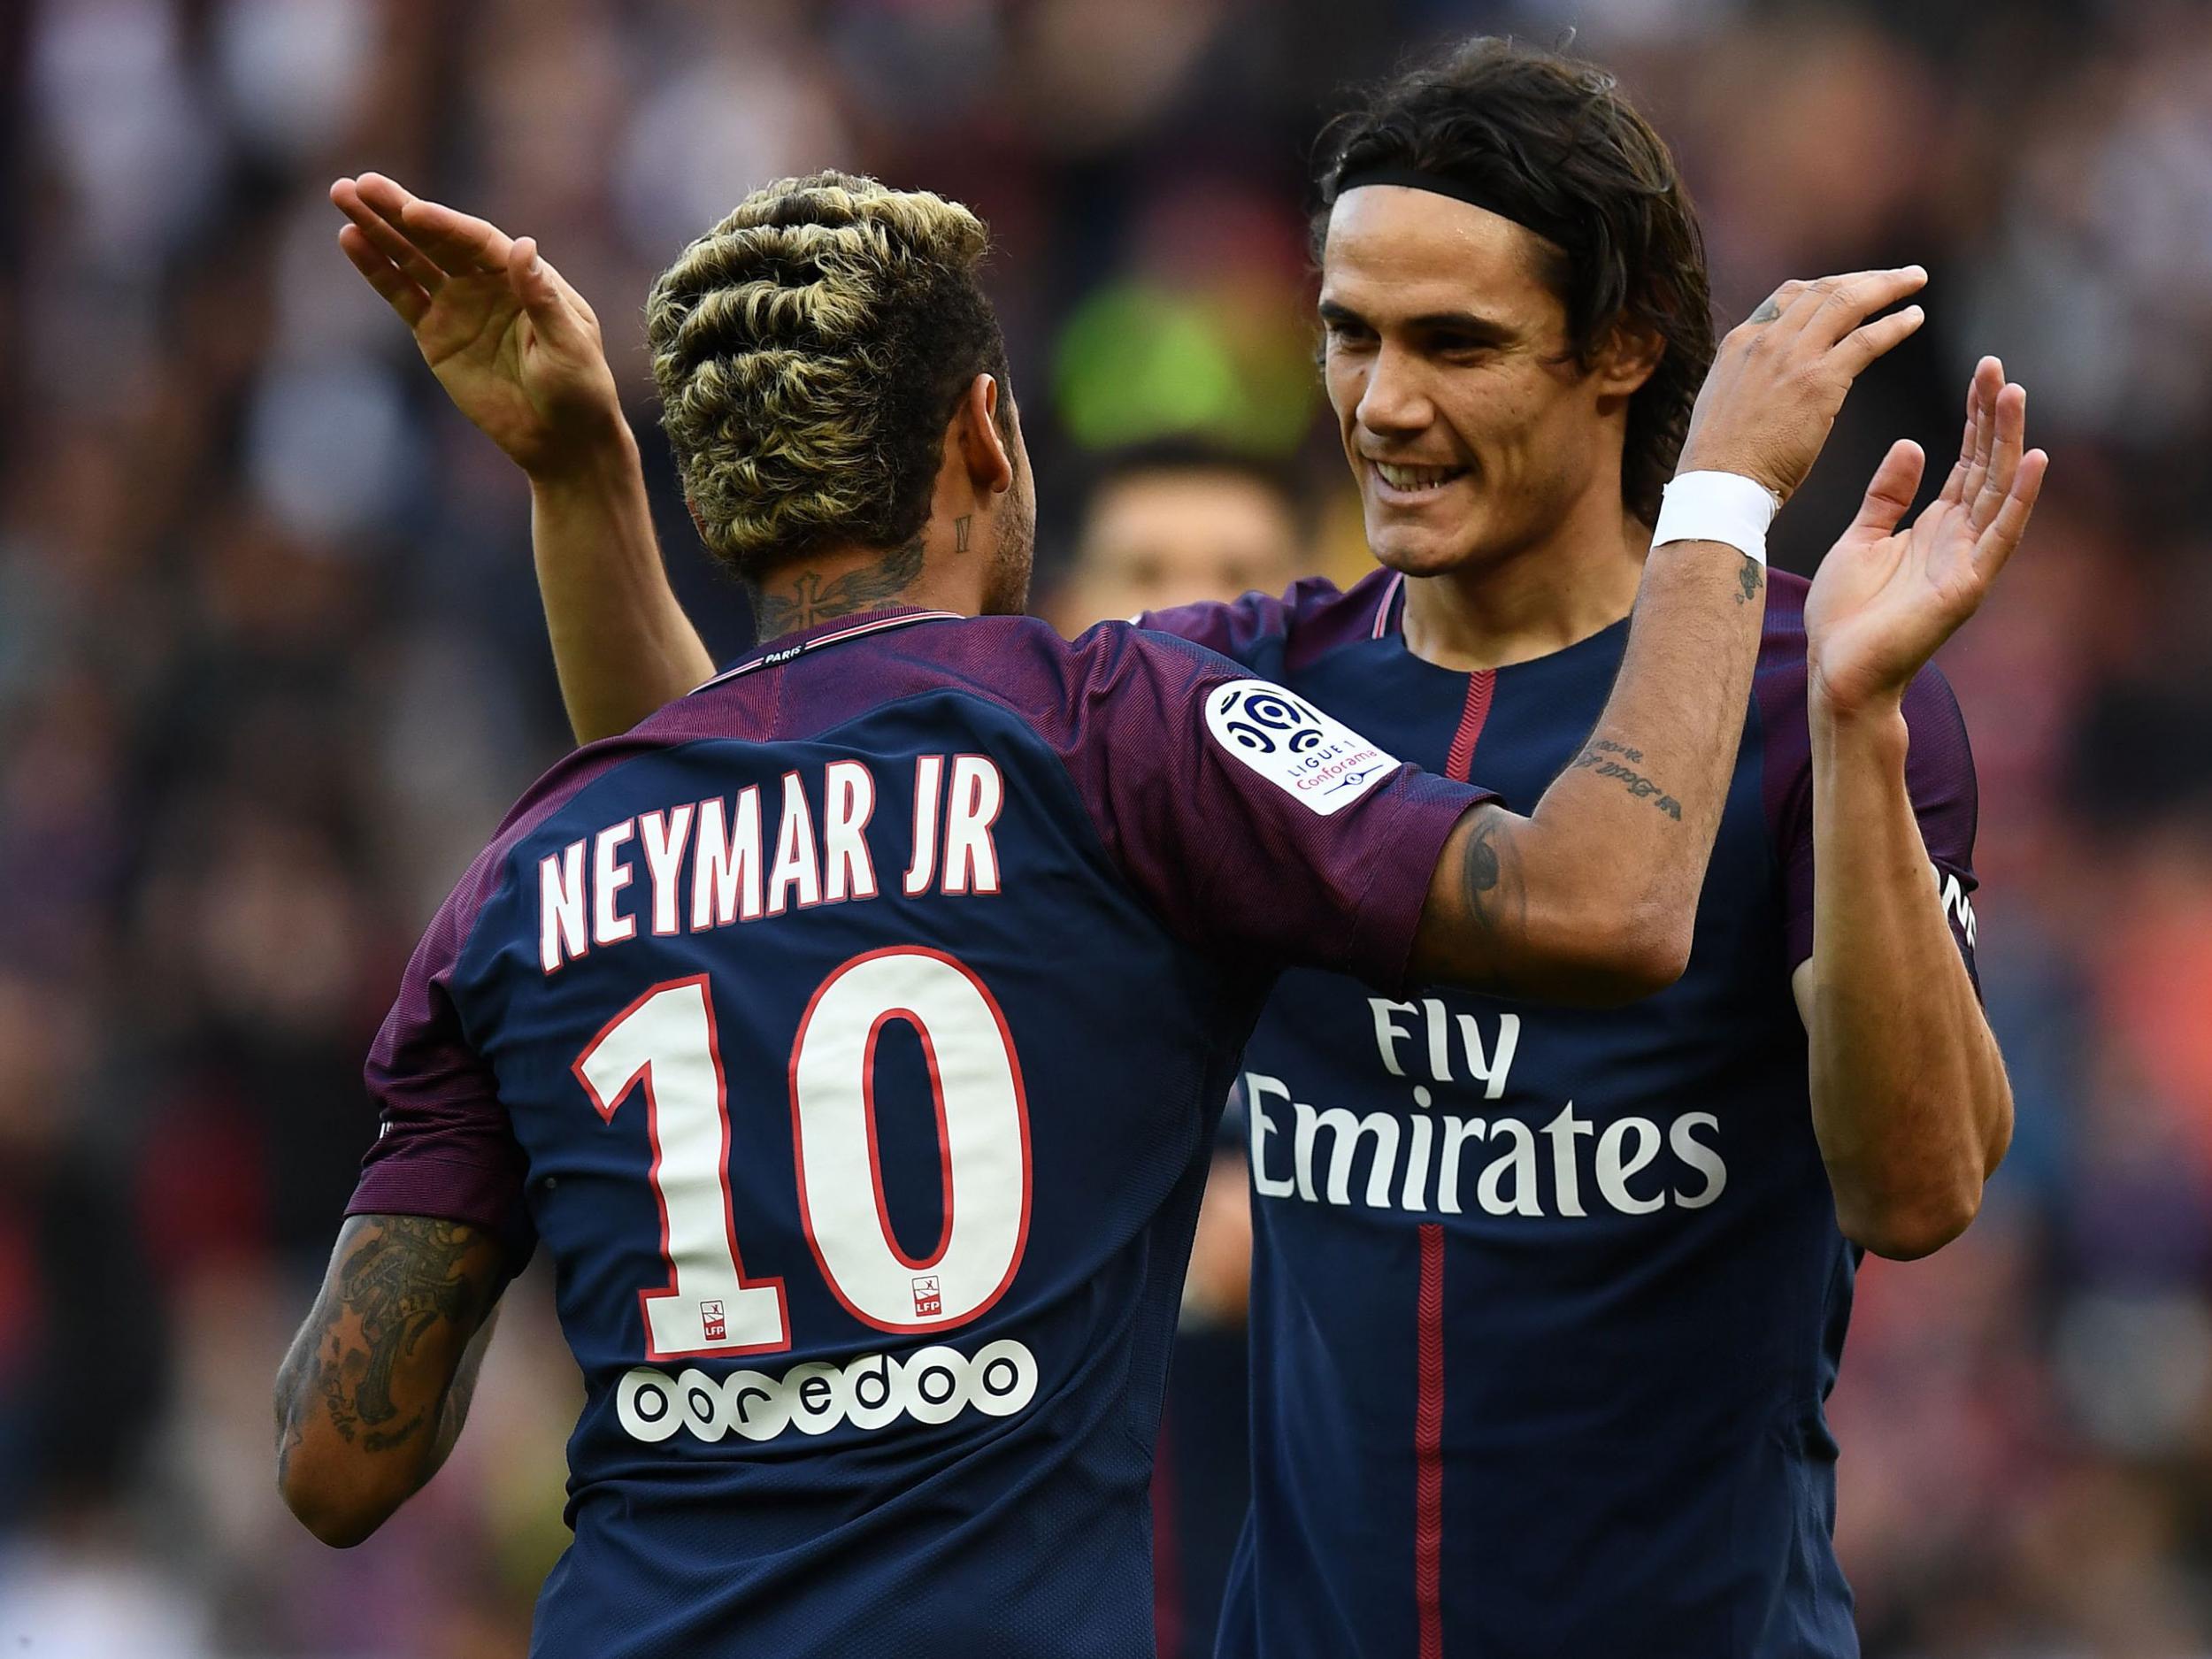 Neymar (l) and Edinson Cavani appeared to put the rift behind them in a subsequent match against Bordeaux